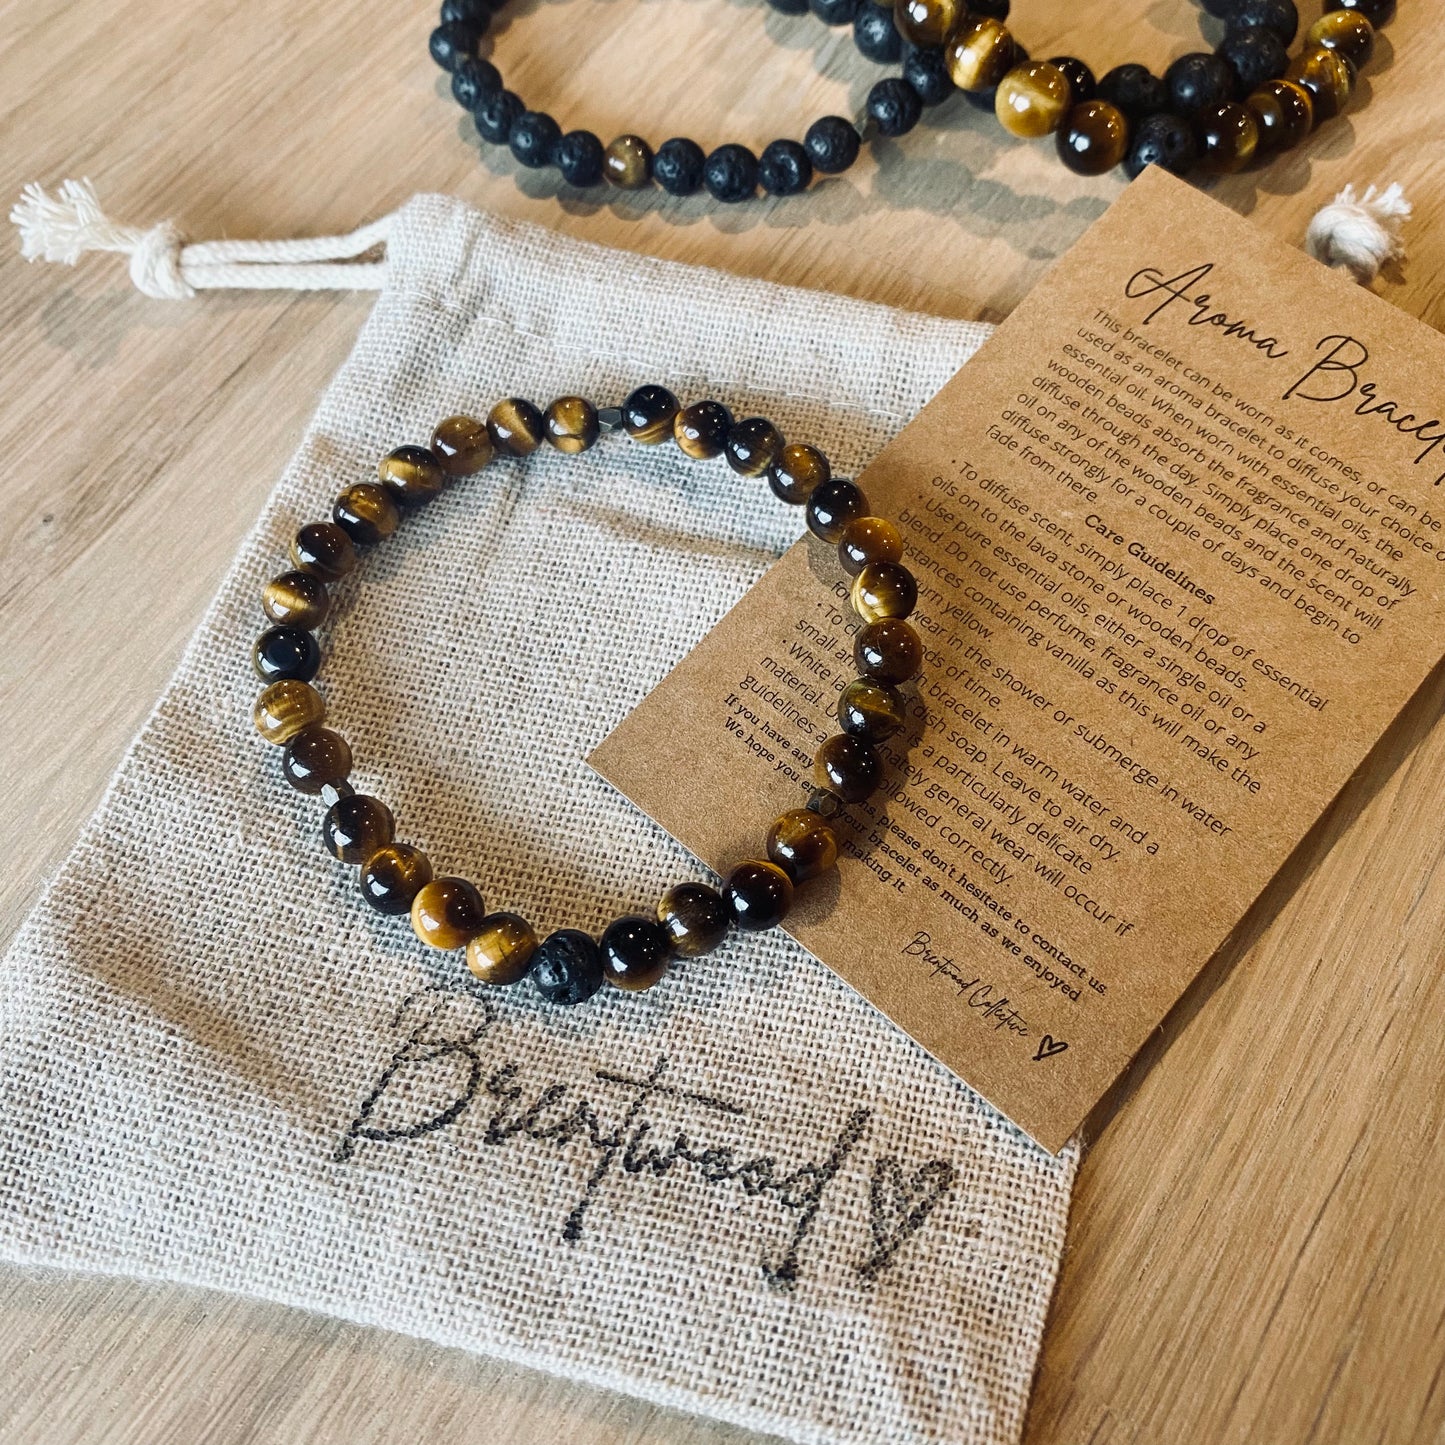 Tiger Eye 6 Aroma Bracelet - 6mm beaded diffuser bracelet made from natural tiger eye gemstone & a single black lava stone bead with antiqued gold faceted embellishments.  Laid on cloth pouch/drawstring bag stamped with “Brentwood” and an aroma bracelet information and care card on kraft brown card.